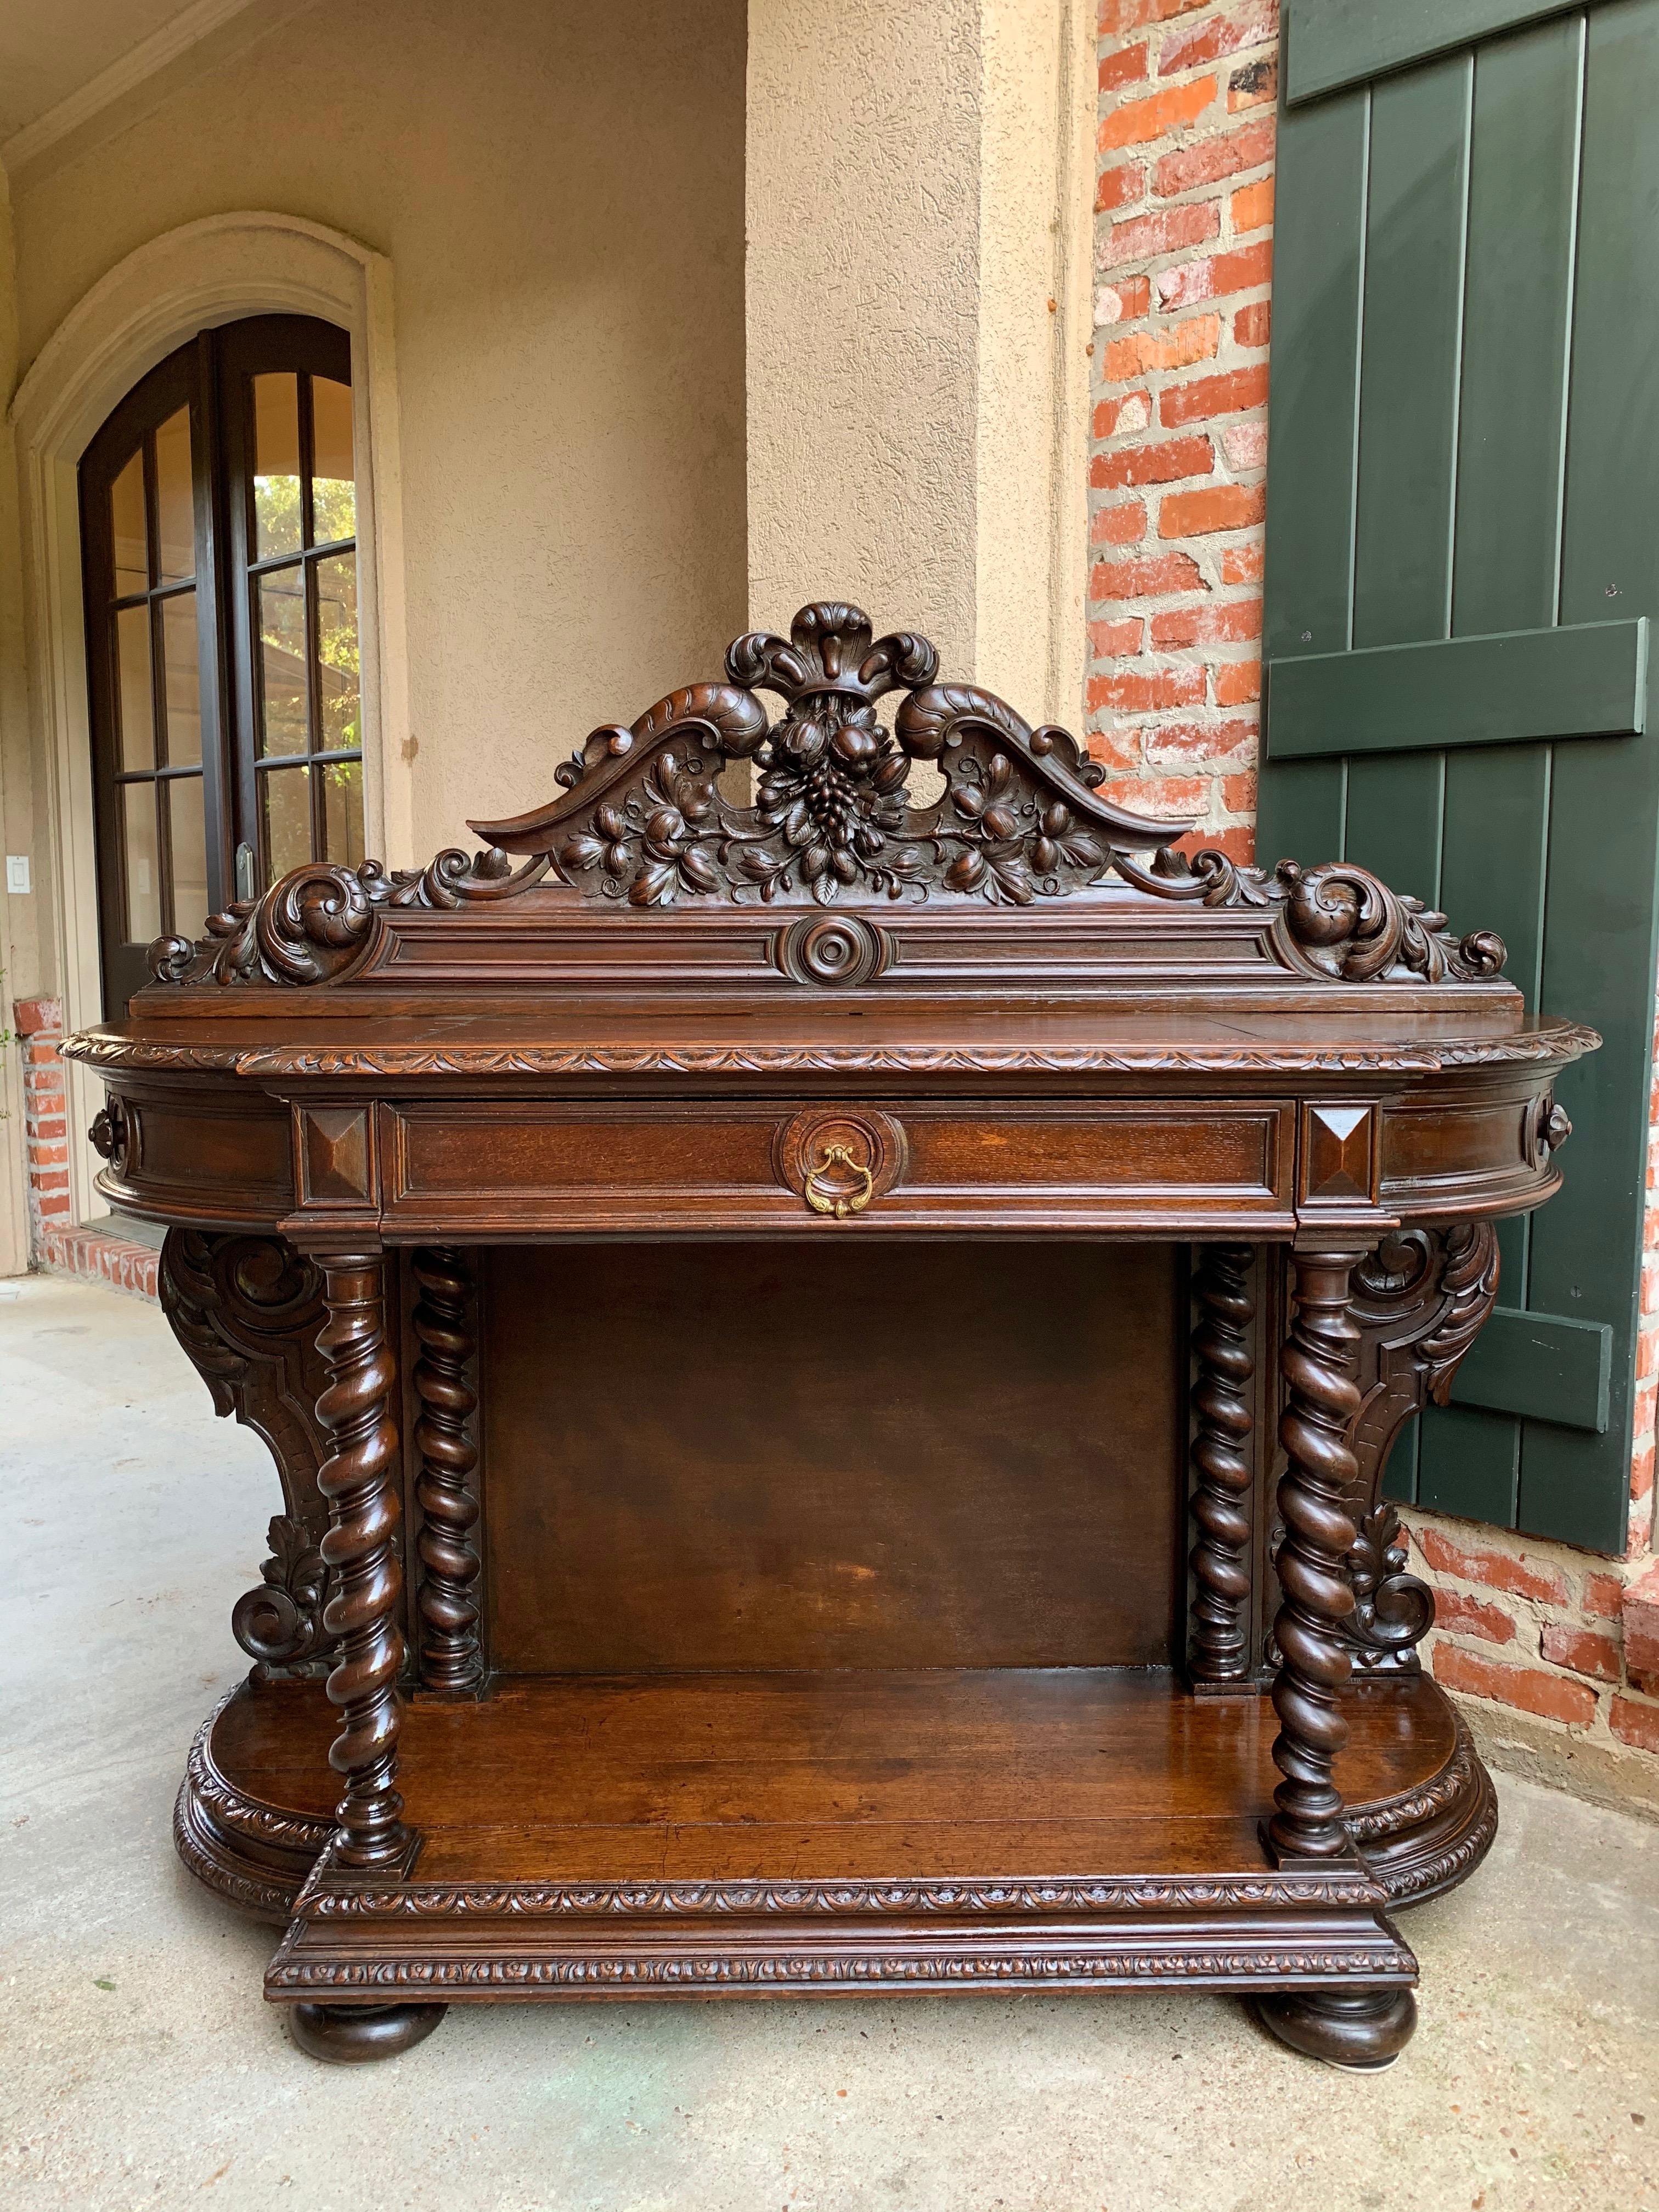 ~Direct from France~
~From a French estate to you, this stunning antique French carved server is loaded with carved features and quality craftsmanship!~
~The upper back crown is huge, with hand carved dimensional fruits and foliate scrolls. Note